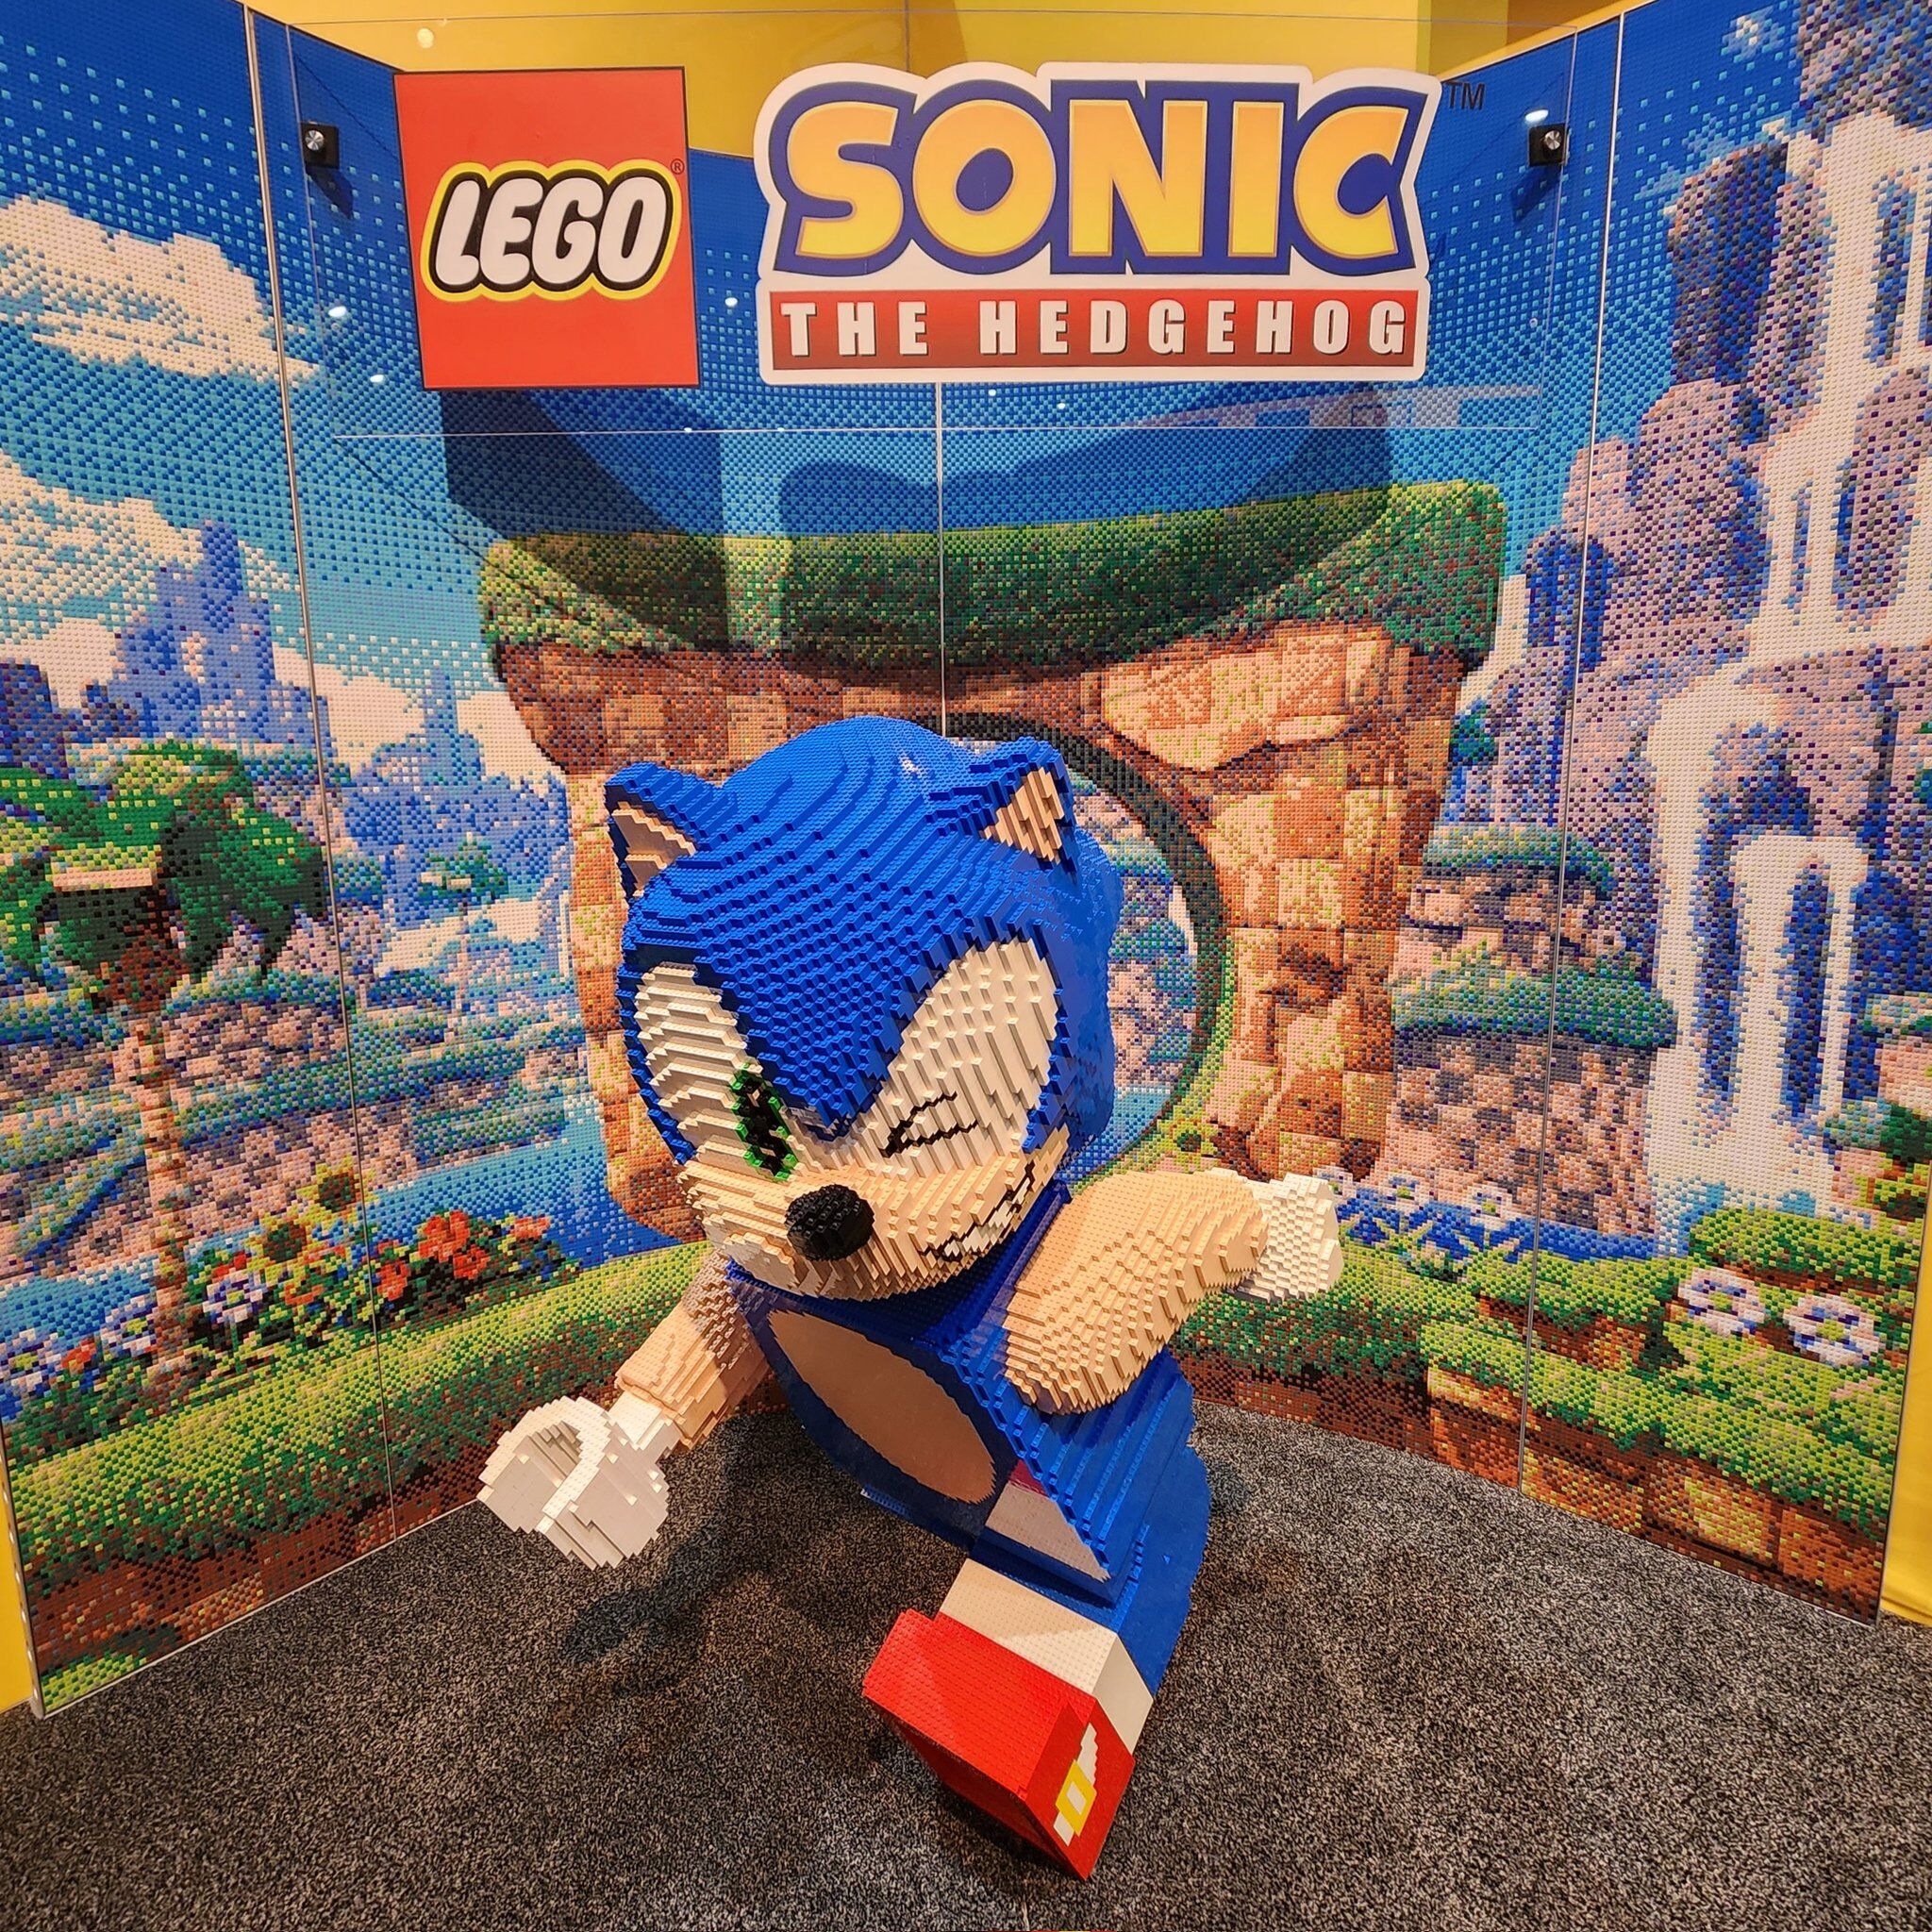 Sonic The Hedgehog, LEGO Games Wiki